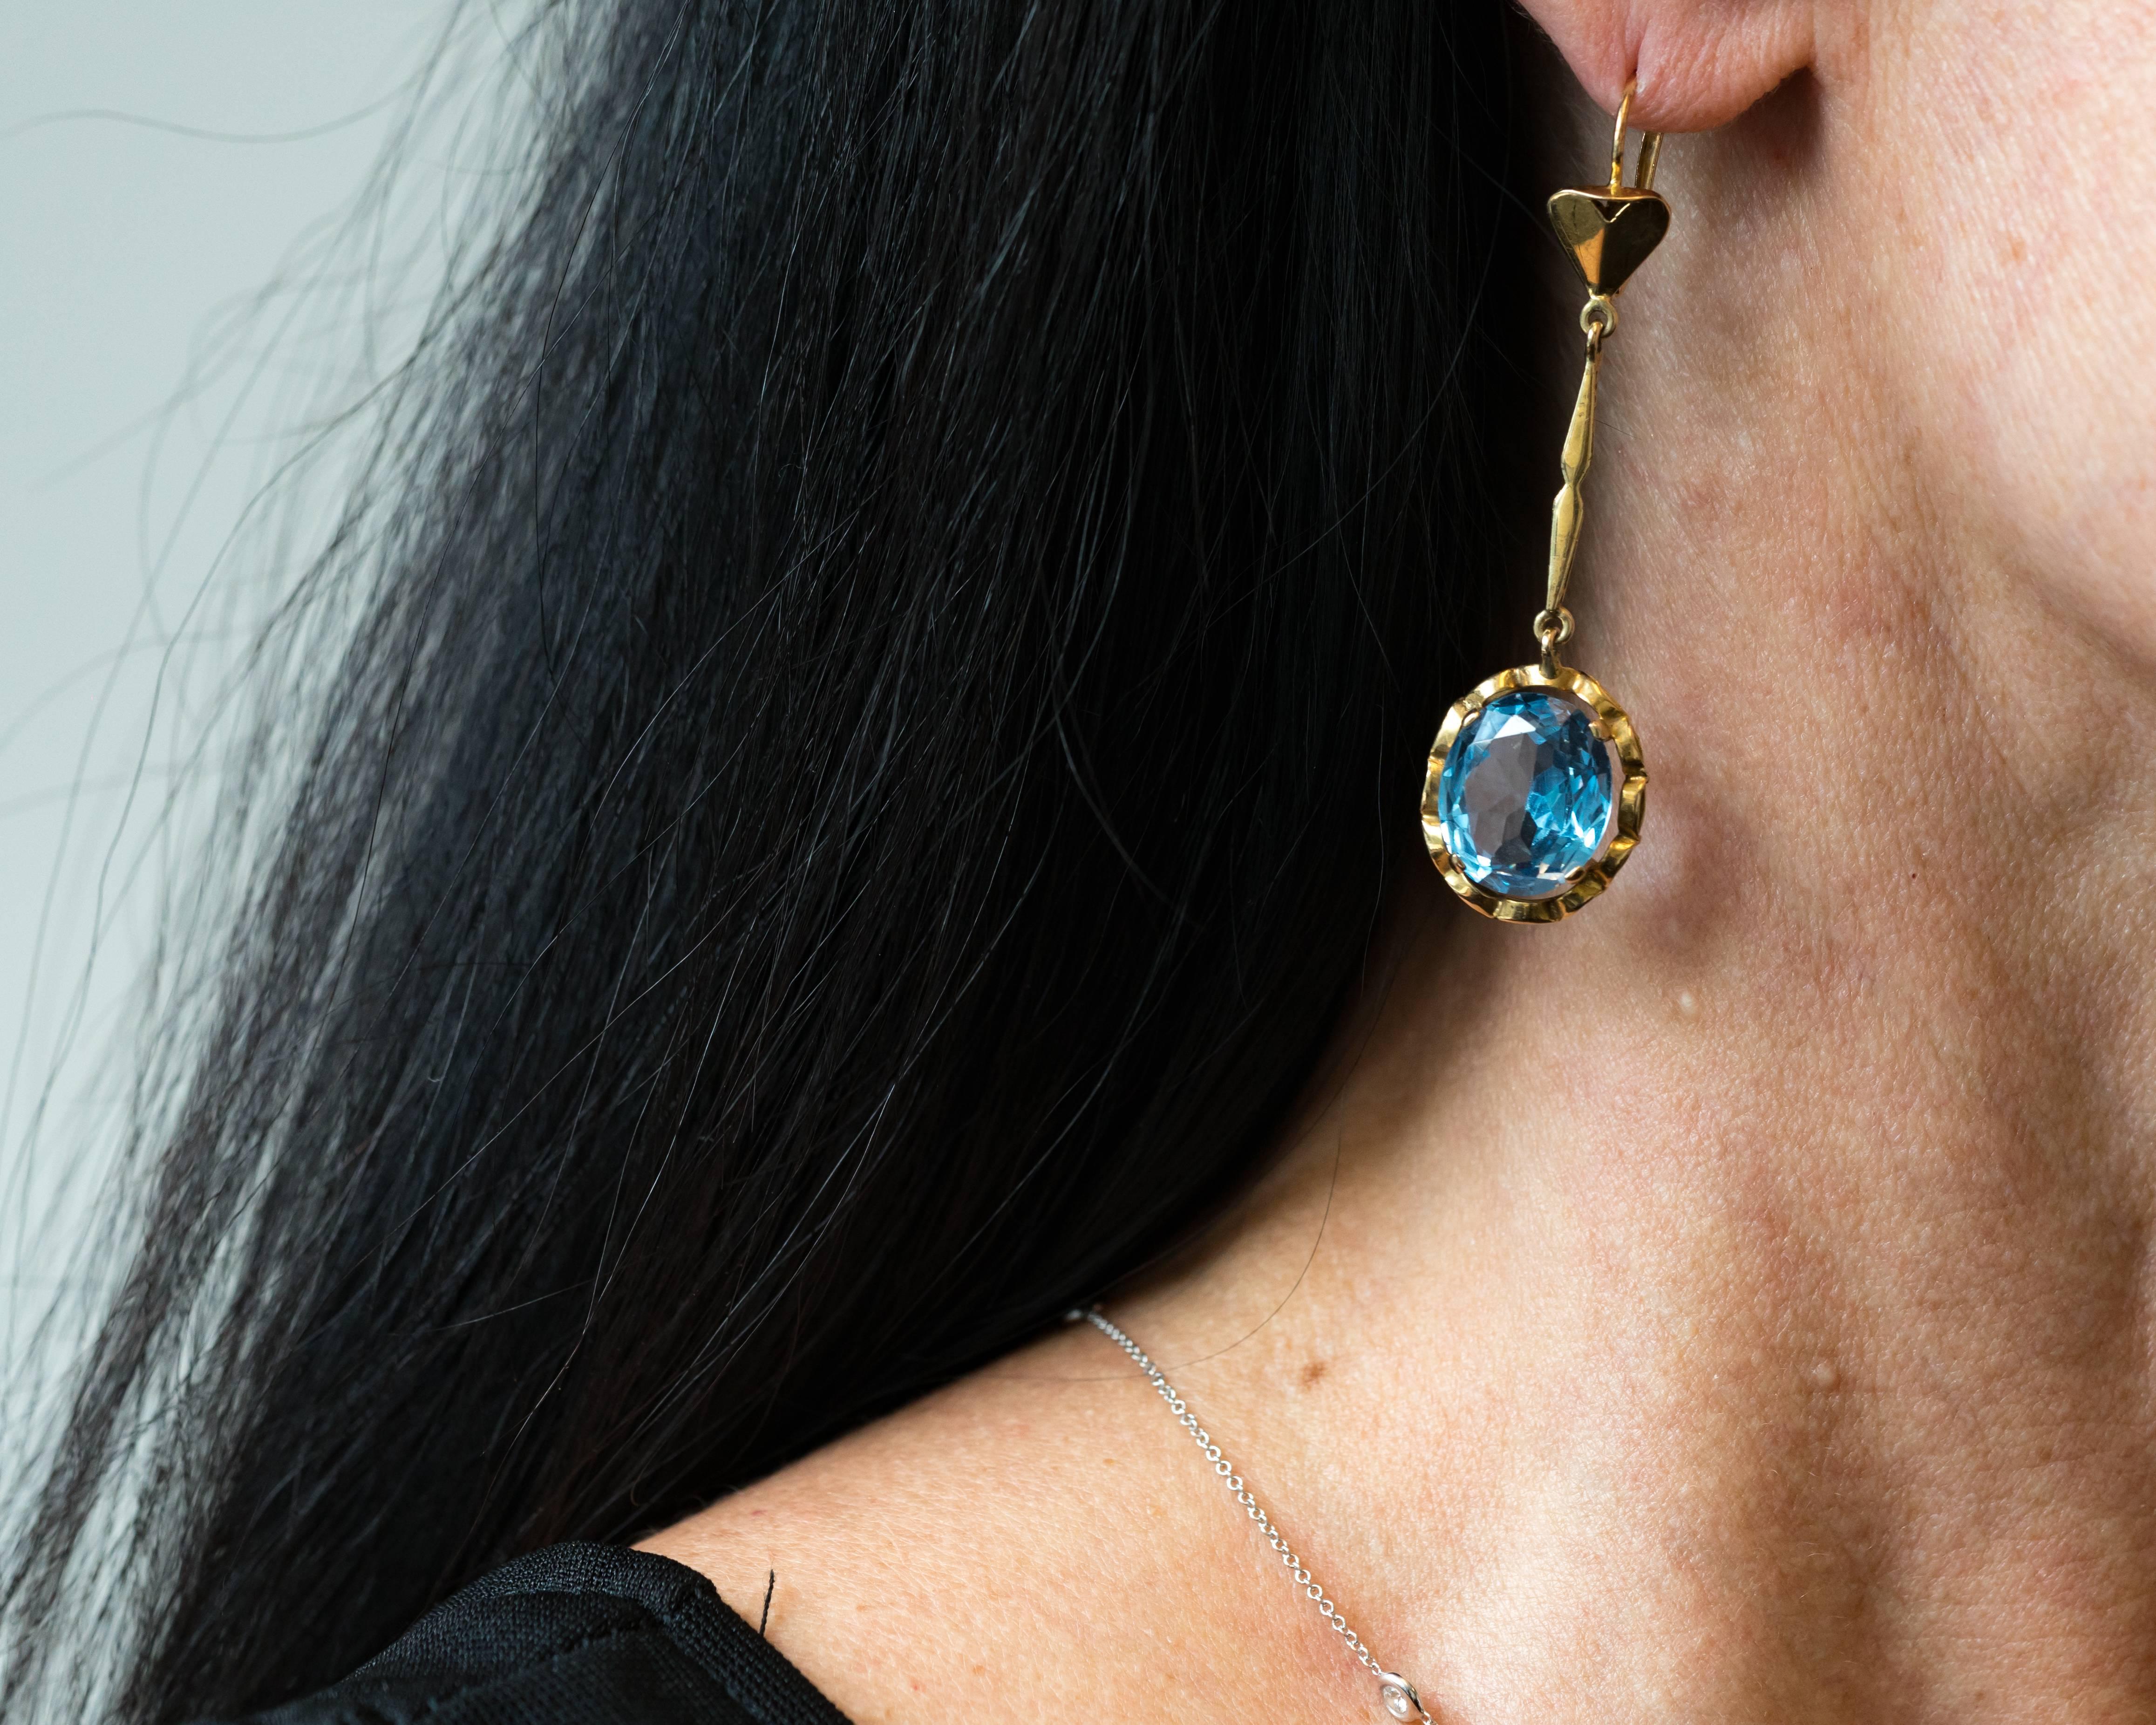 We love these gorgeous Blue Topaz Dangle Earrings! Each earring features a 
prong set 5 carat blue topaz measuring 13 millimeters by 12 millimeters. The earring length measures 60 millimeters from the top of the wire arch to the bottom of the